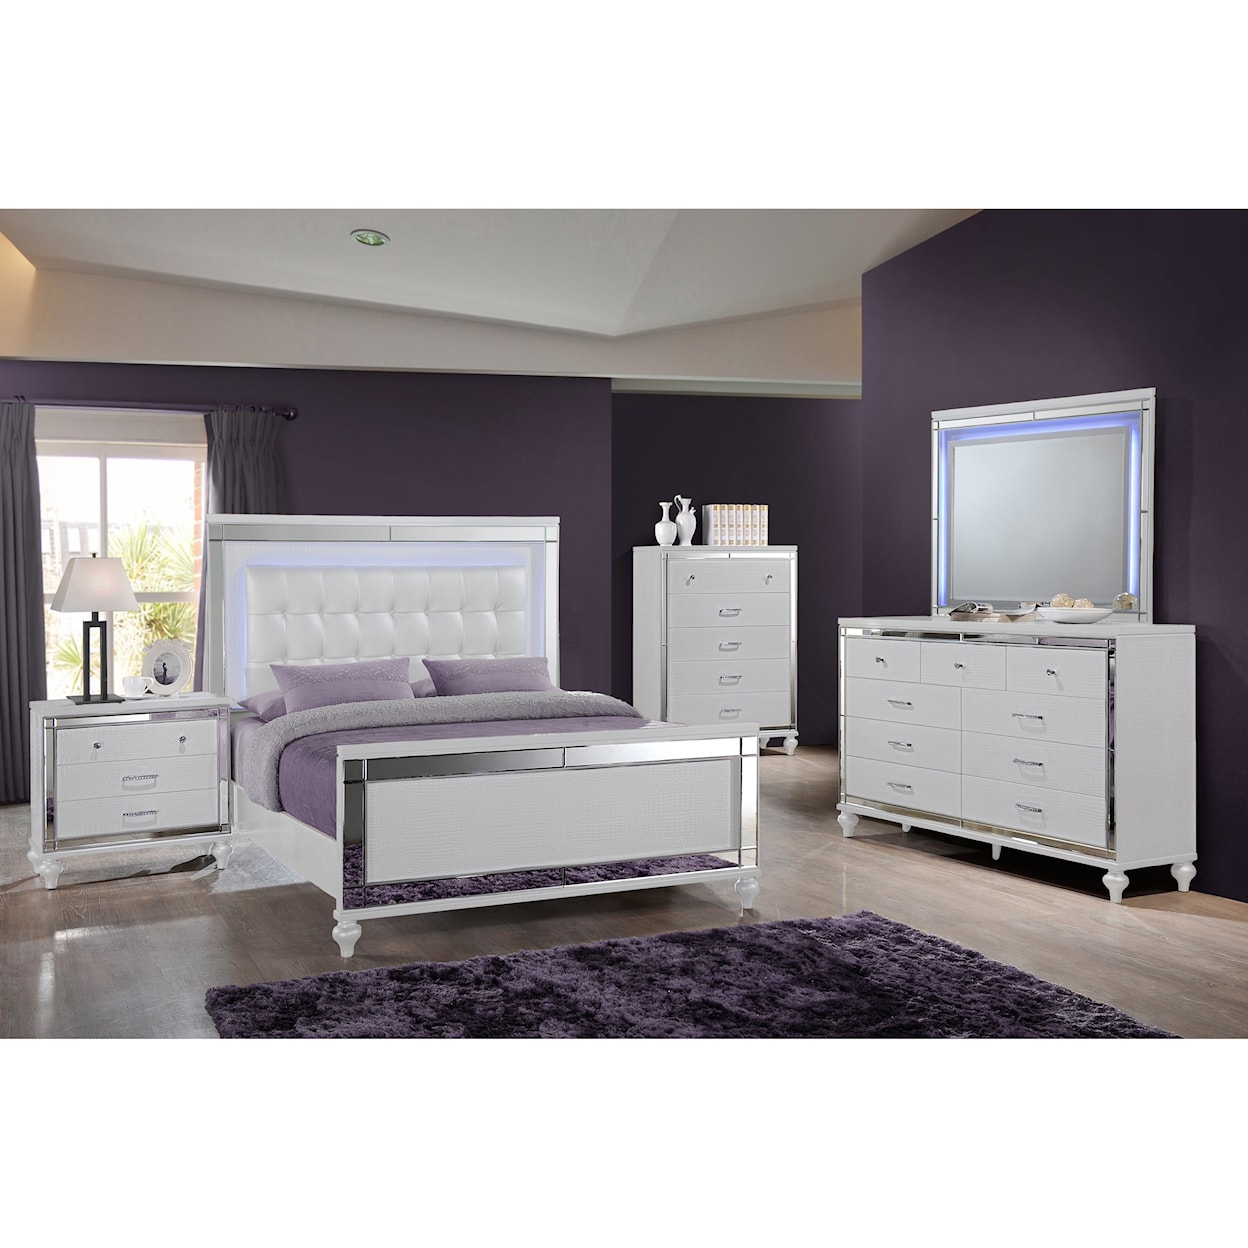 New Classic Furniture Valerie Cal King Bedroom Group